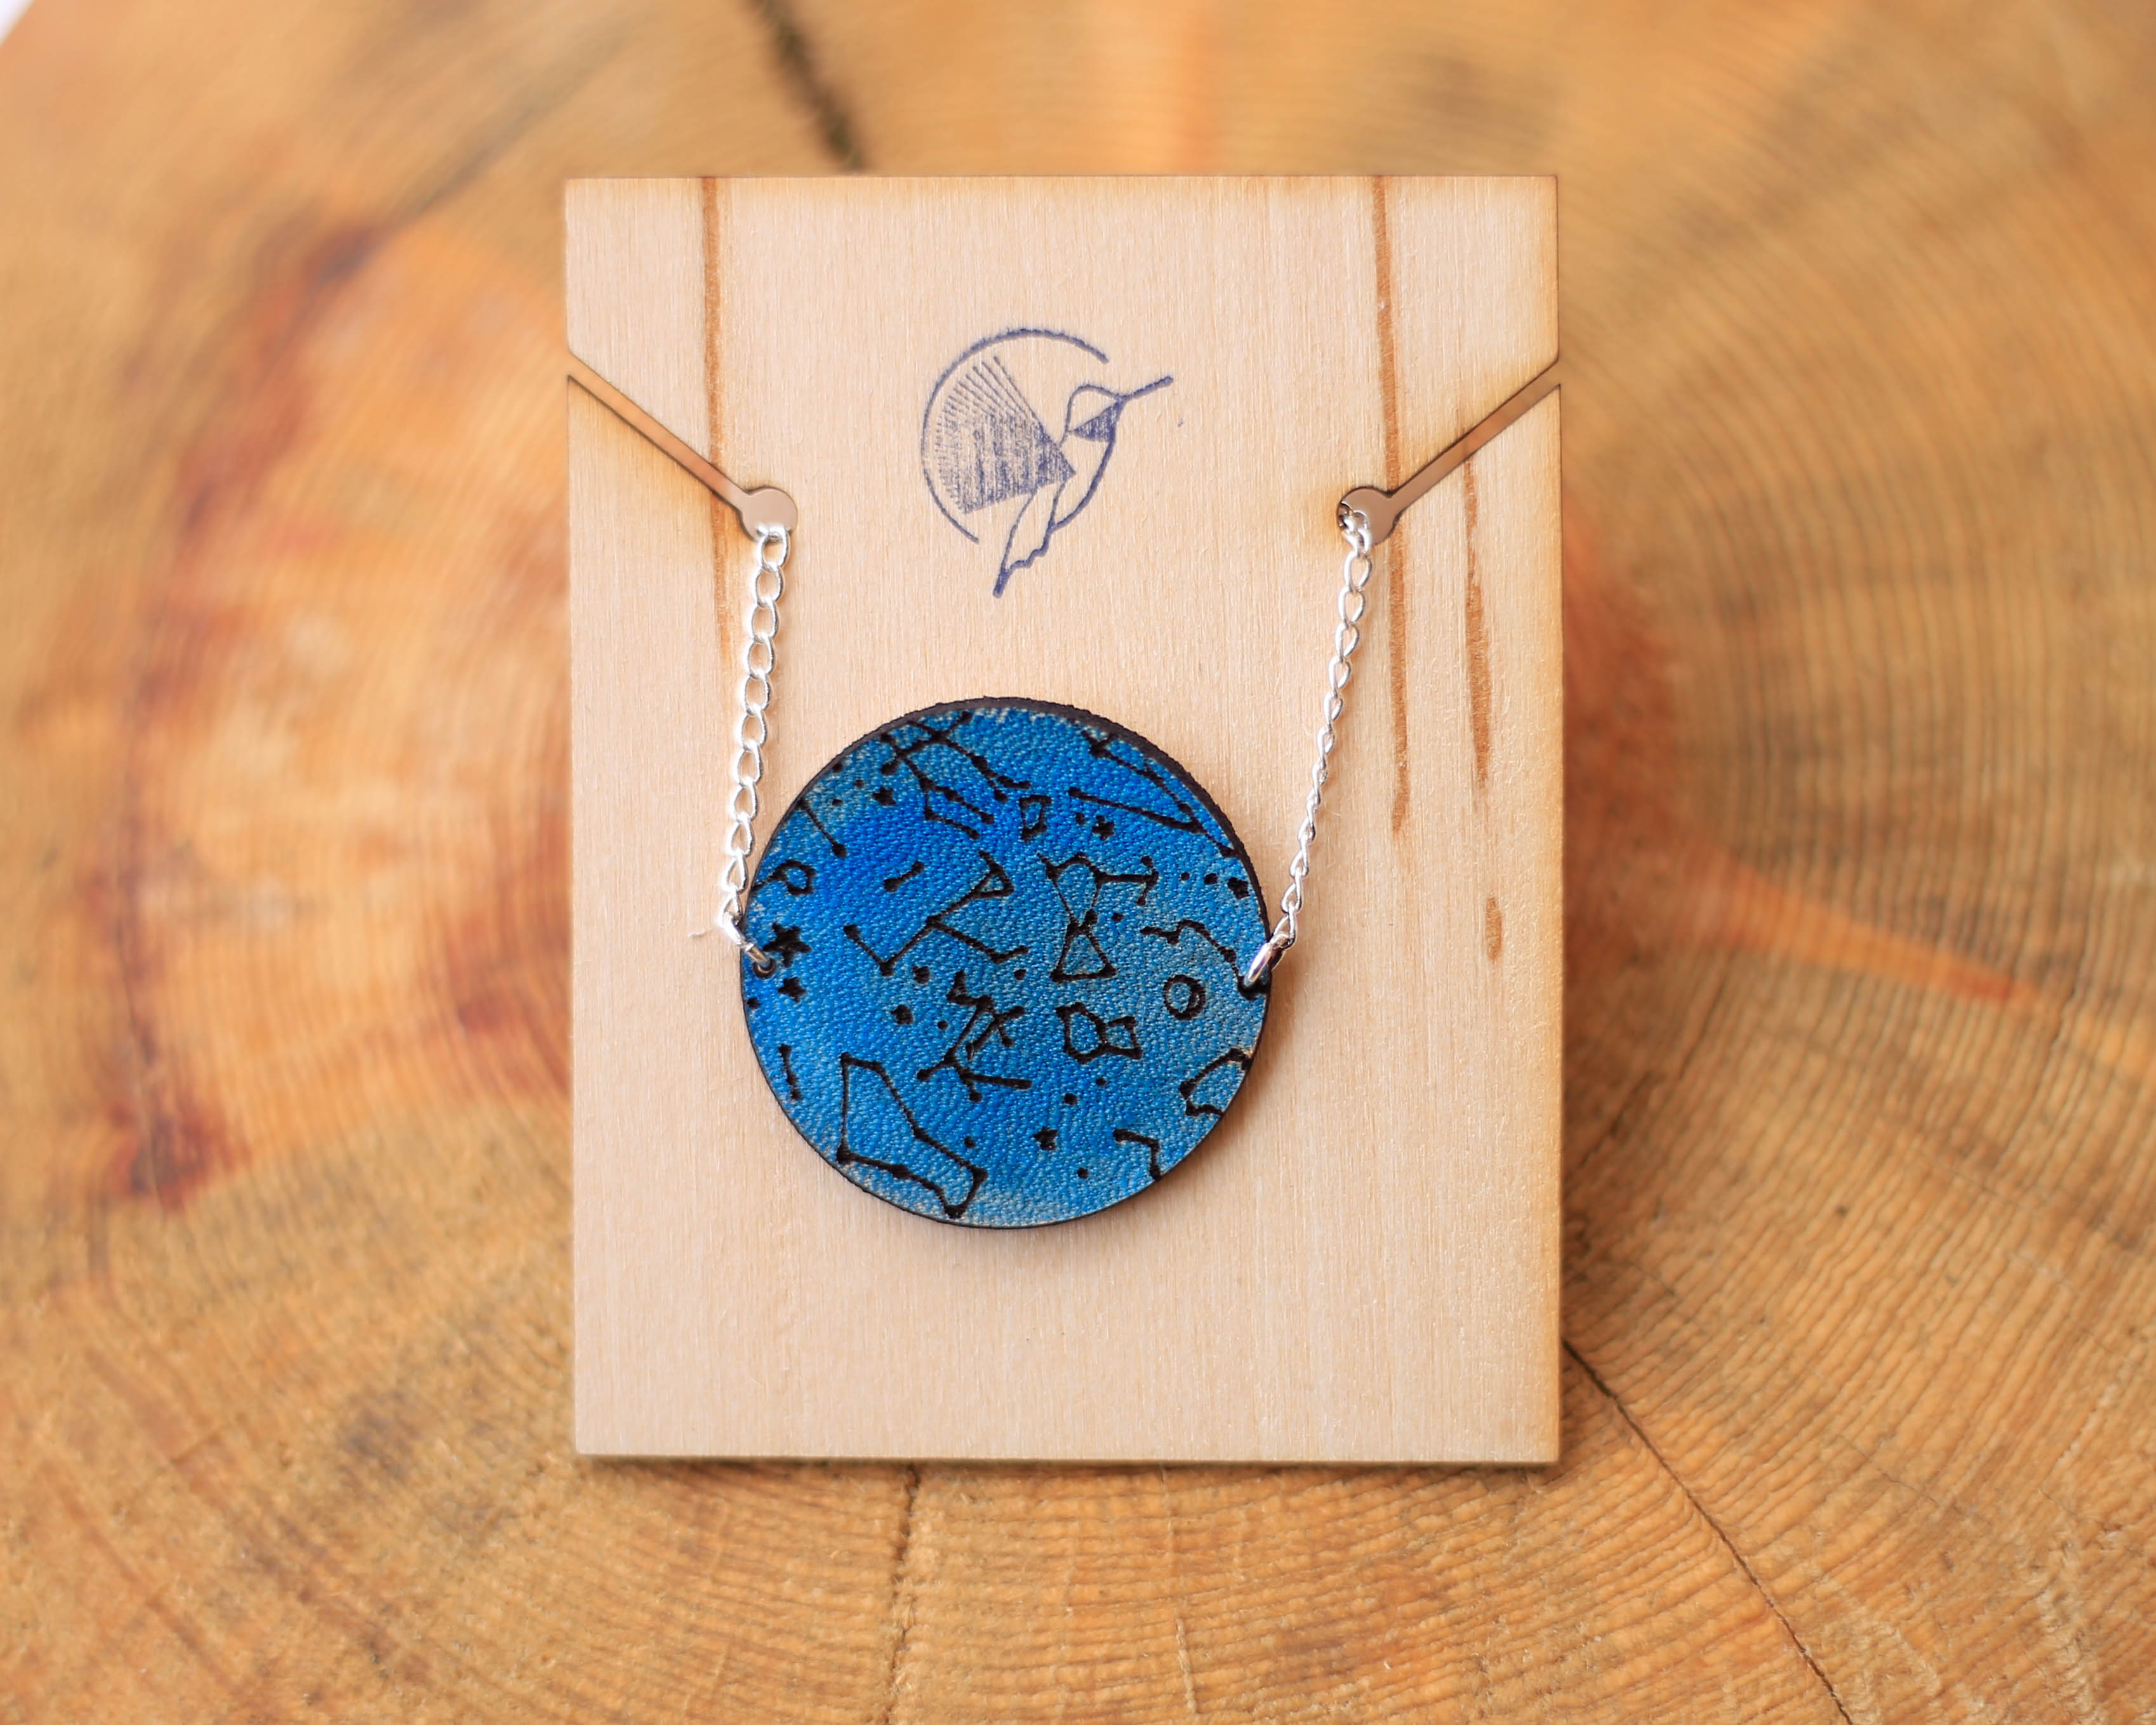 The Blue Star Collection necklace